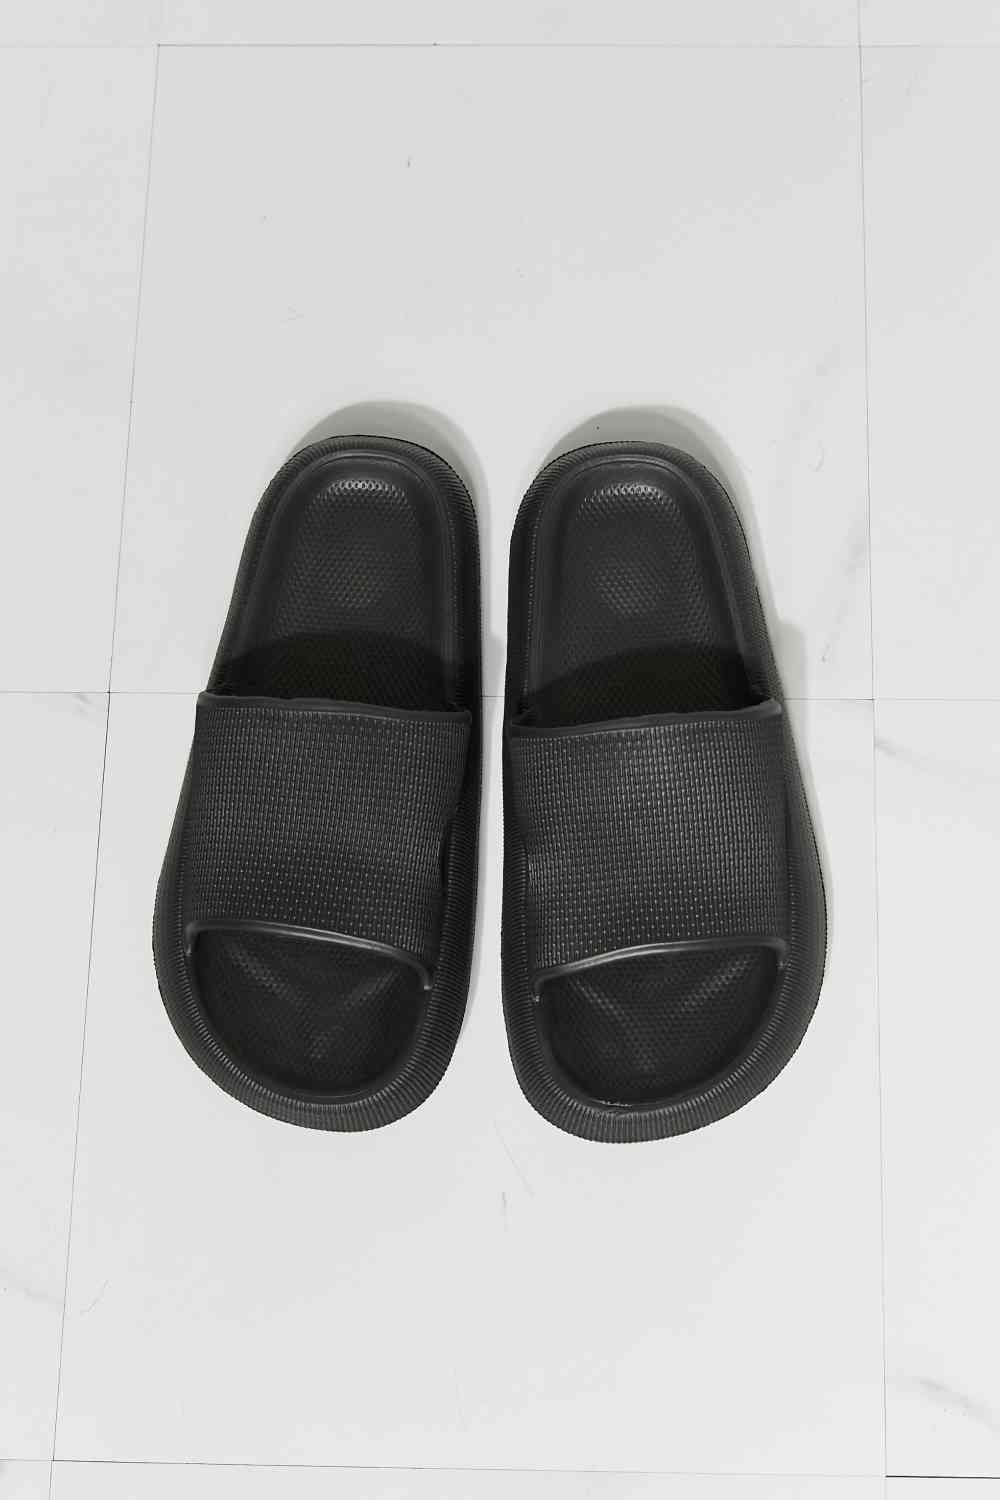 MMShoes Arms Around Me Open Toe Slide in Black - Guy Christopher